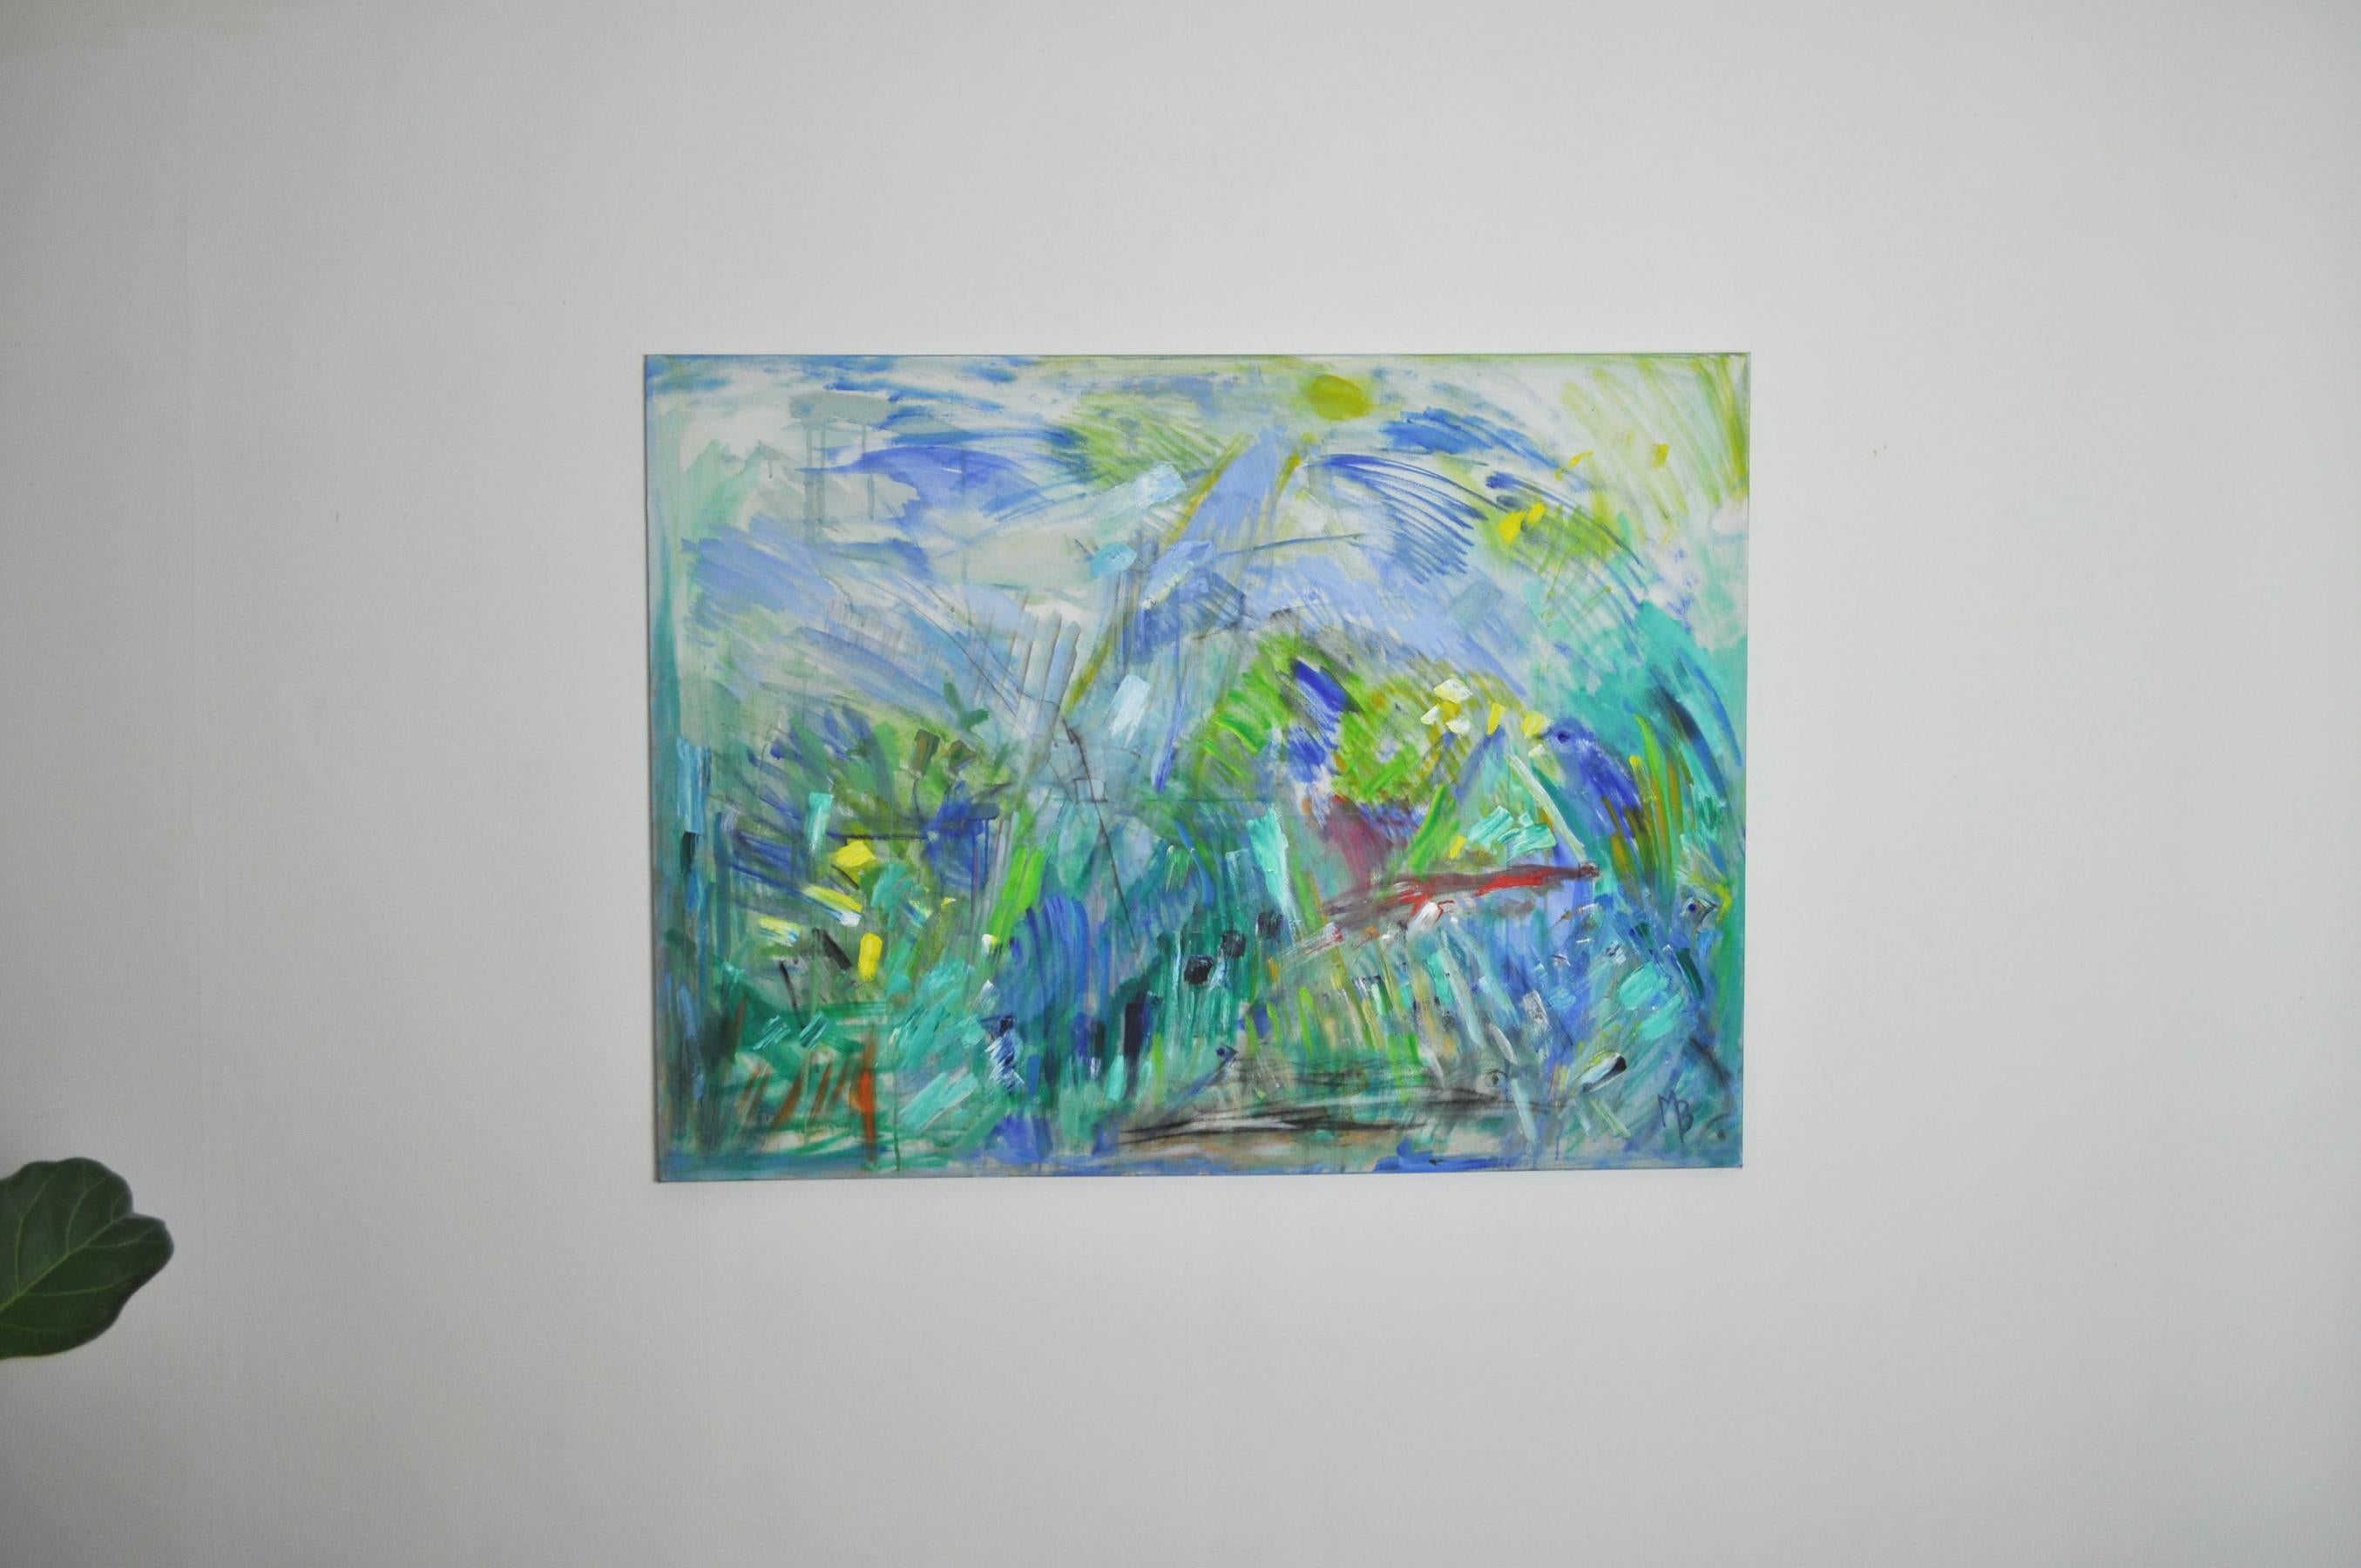 Contemporary Abstract Expressionistic Danish Painting  - Blue Landscape Painting by Mette Birckner